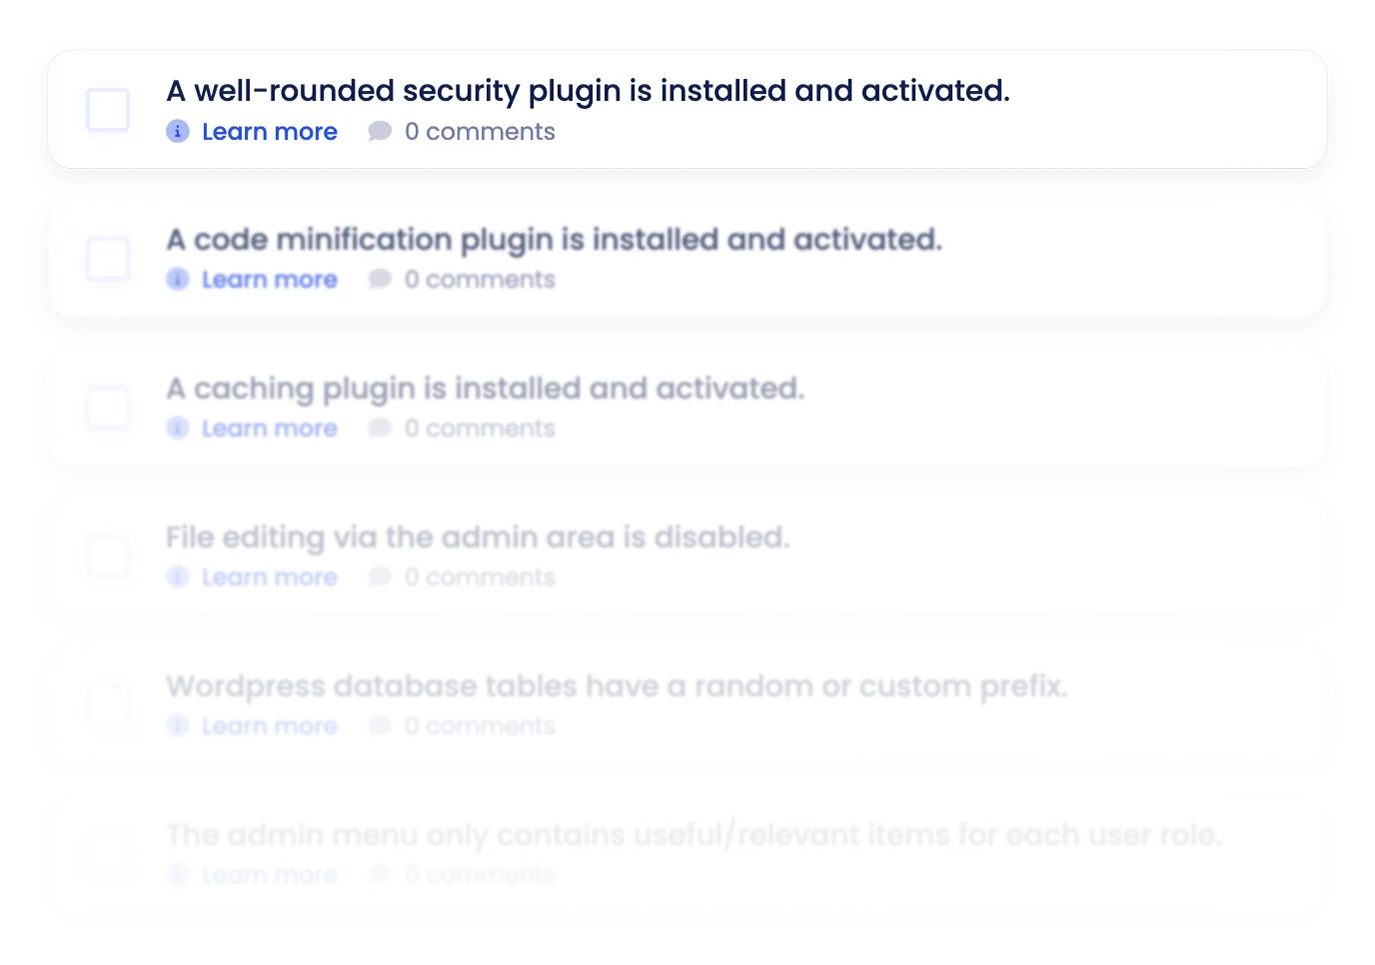 Preview of the new Wordpress section in Koalati's checklist, with tasks such as: "A well-rounded security plugin is installed and activated.", "A code minification plugin is installed and activated.", "A caching plugin is installed and activated.", "File editing via the admin area is disabled.", "Wordpress database tables have a random or custom prefix.", and more.